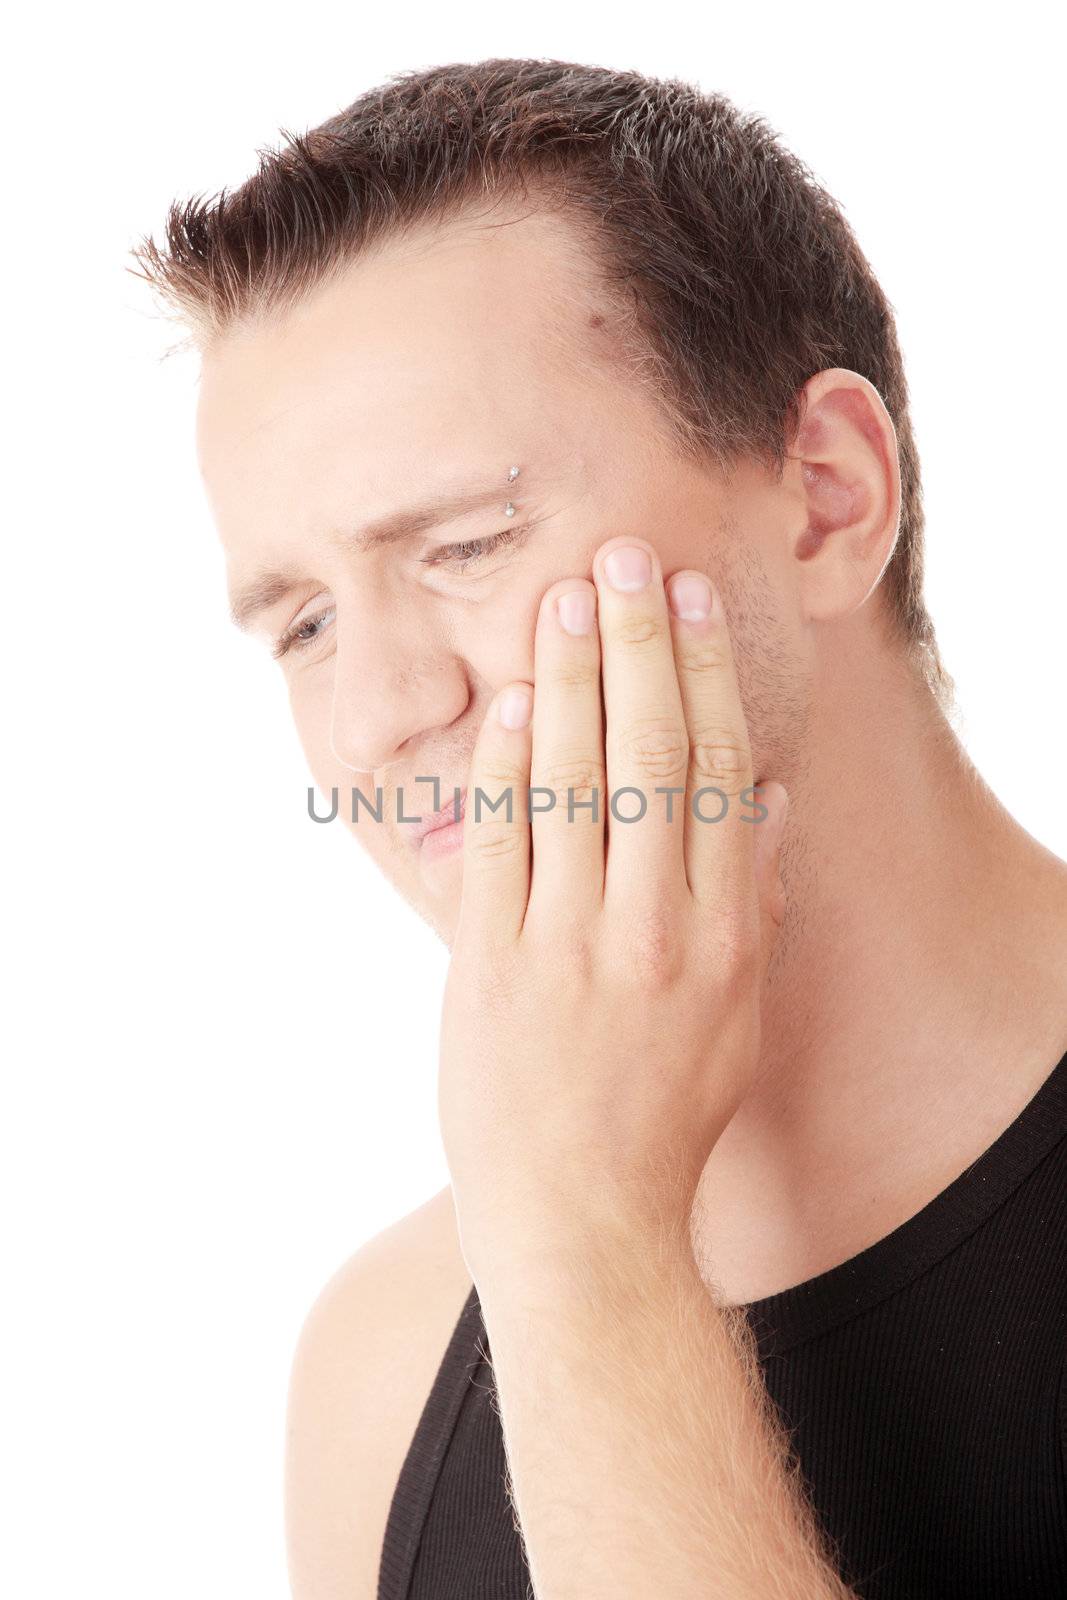 Man with pain expression isolated on white